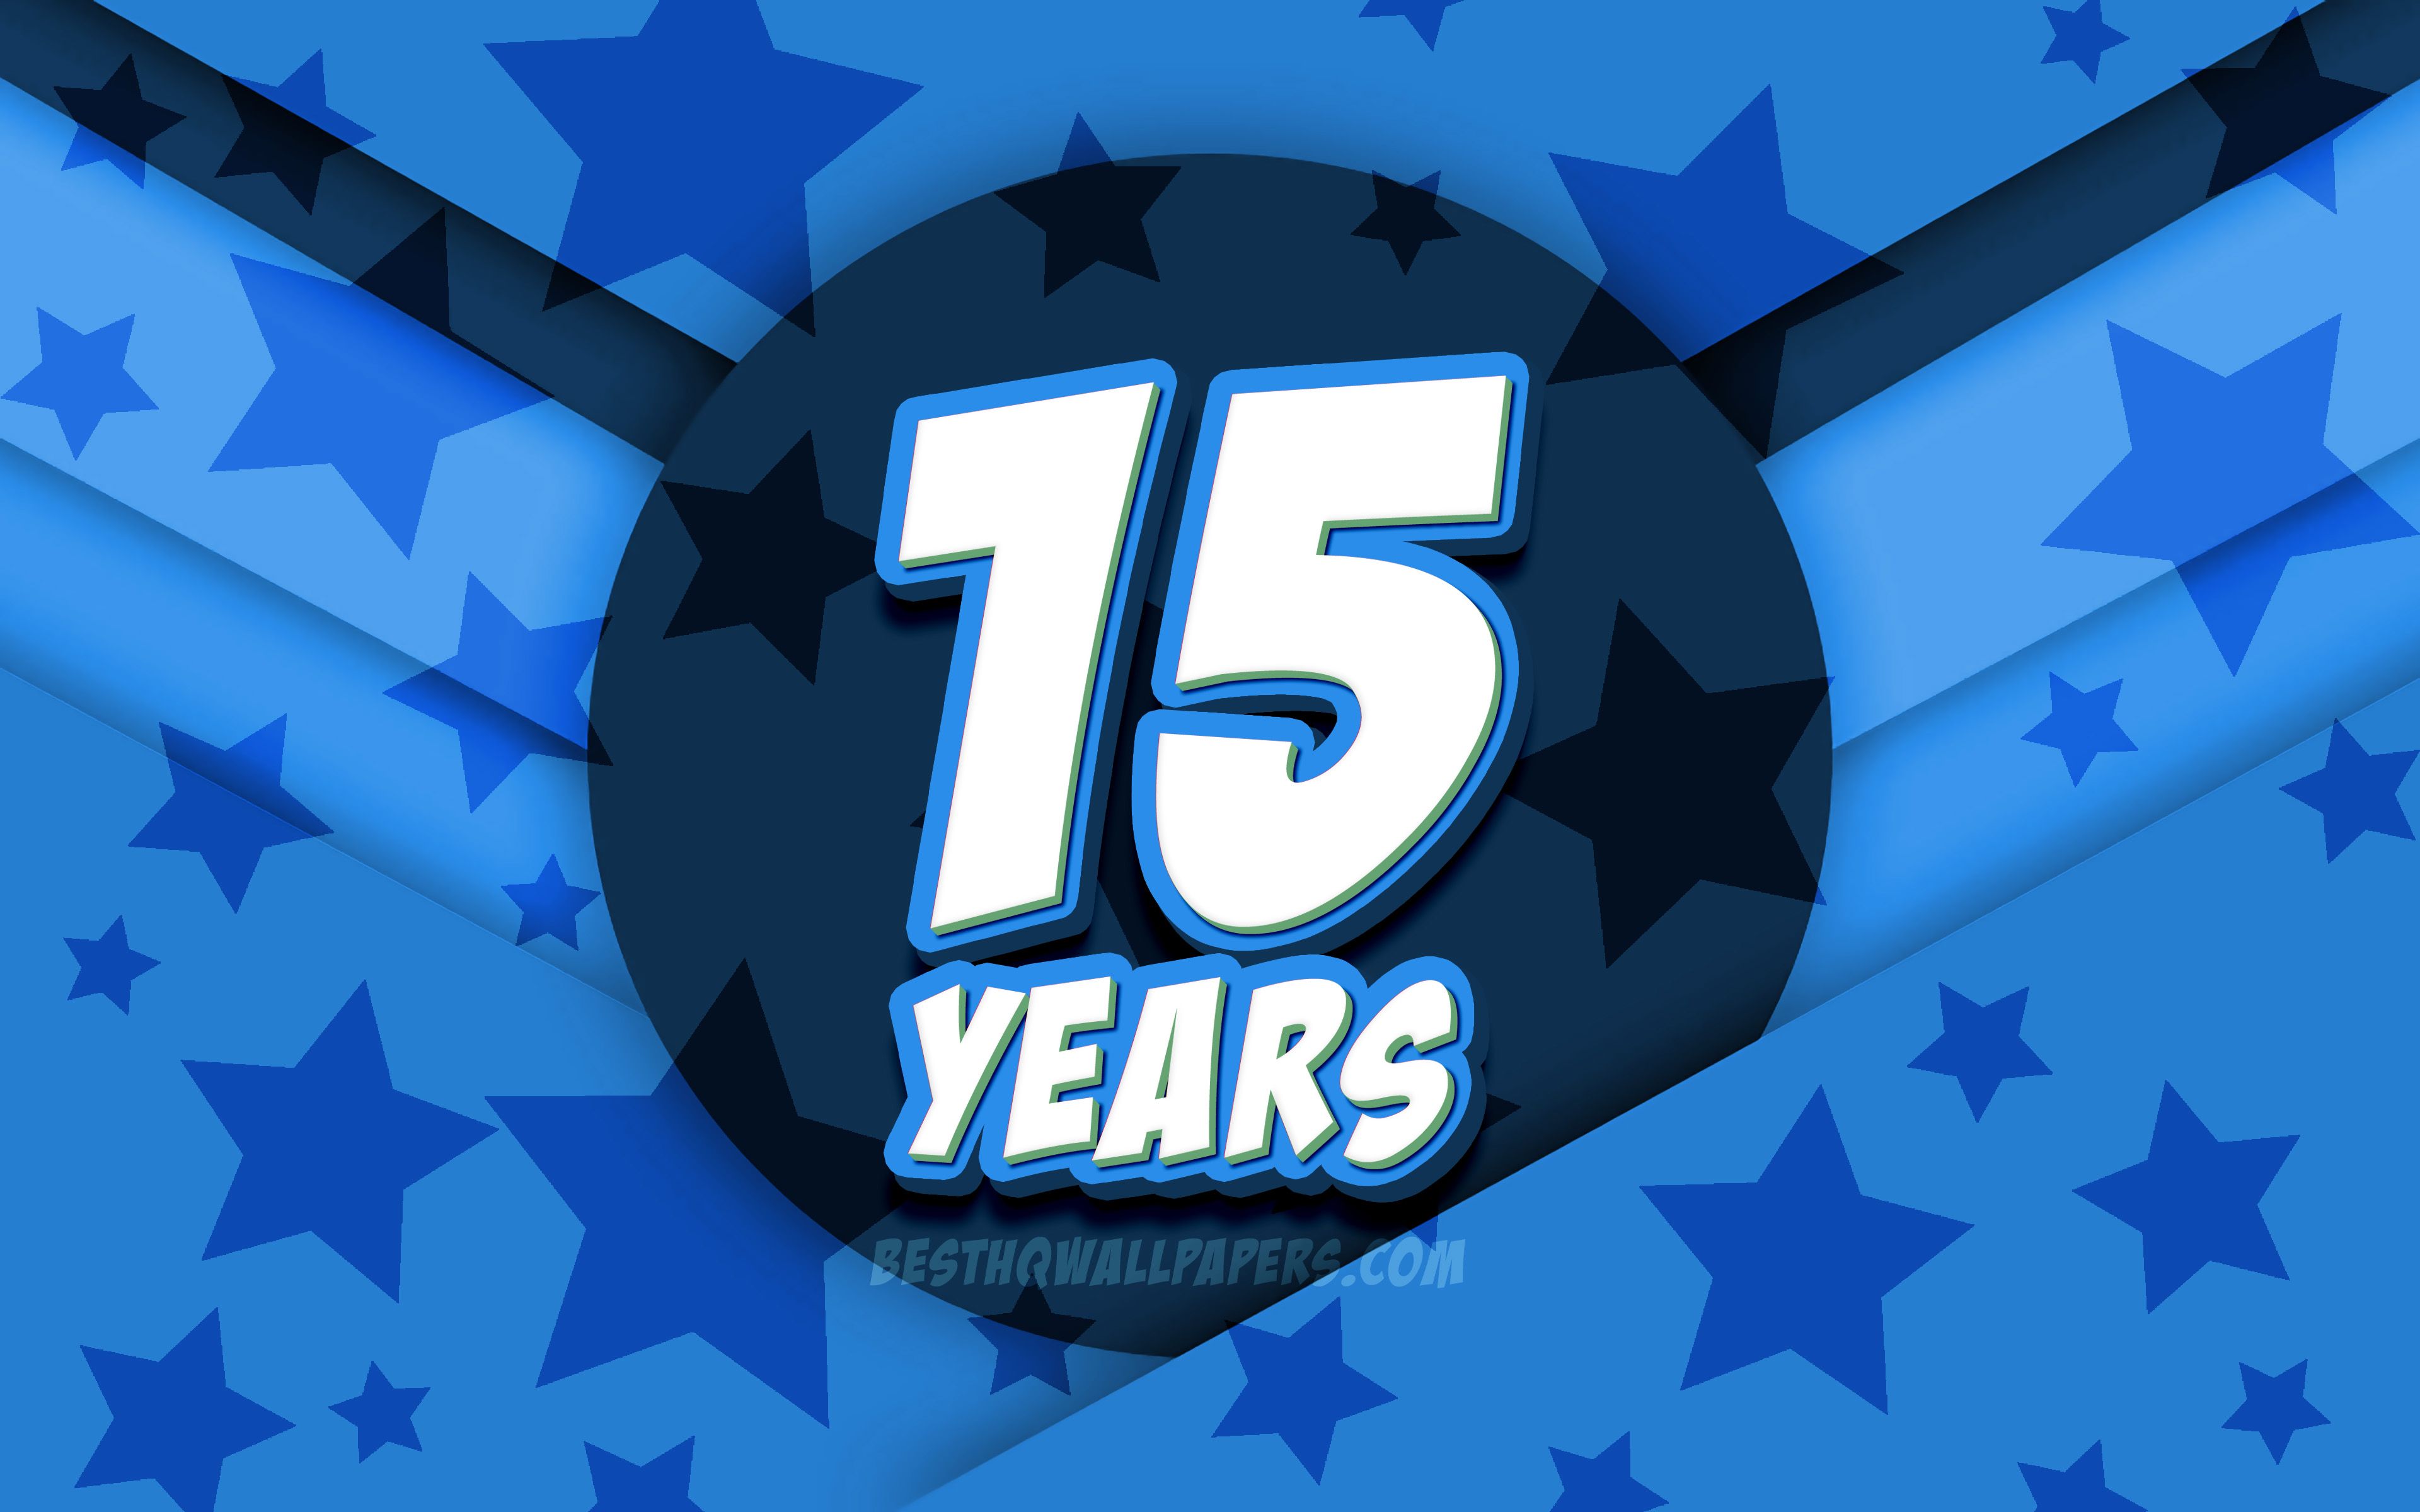 Download wallpaper 4k, Happy 15 Years Birthday, comic 3D letters, Birthday Party, blue stars background, Happy 15th birthday, 15th Birthday Party, artwork, Birthday concept, 15th Birthday for desktop with resolution 3840x2400. High